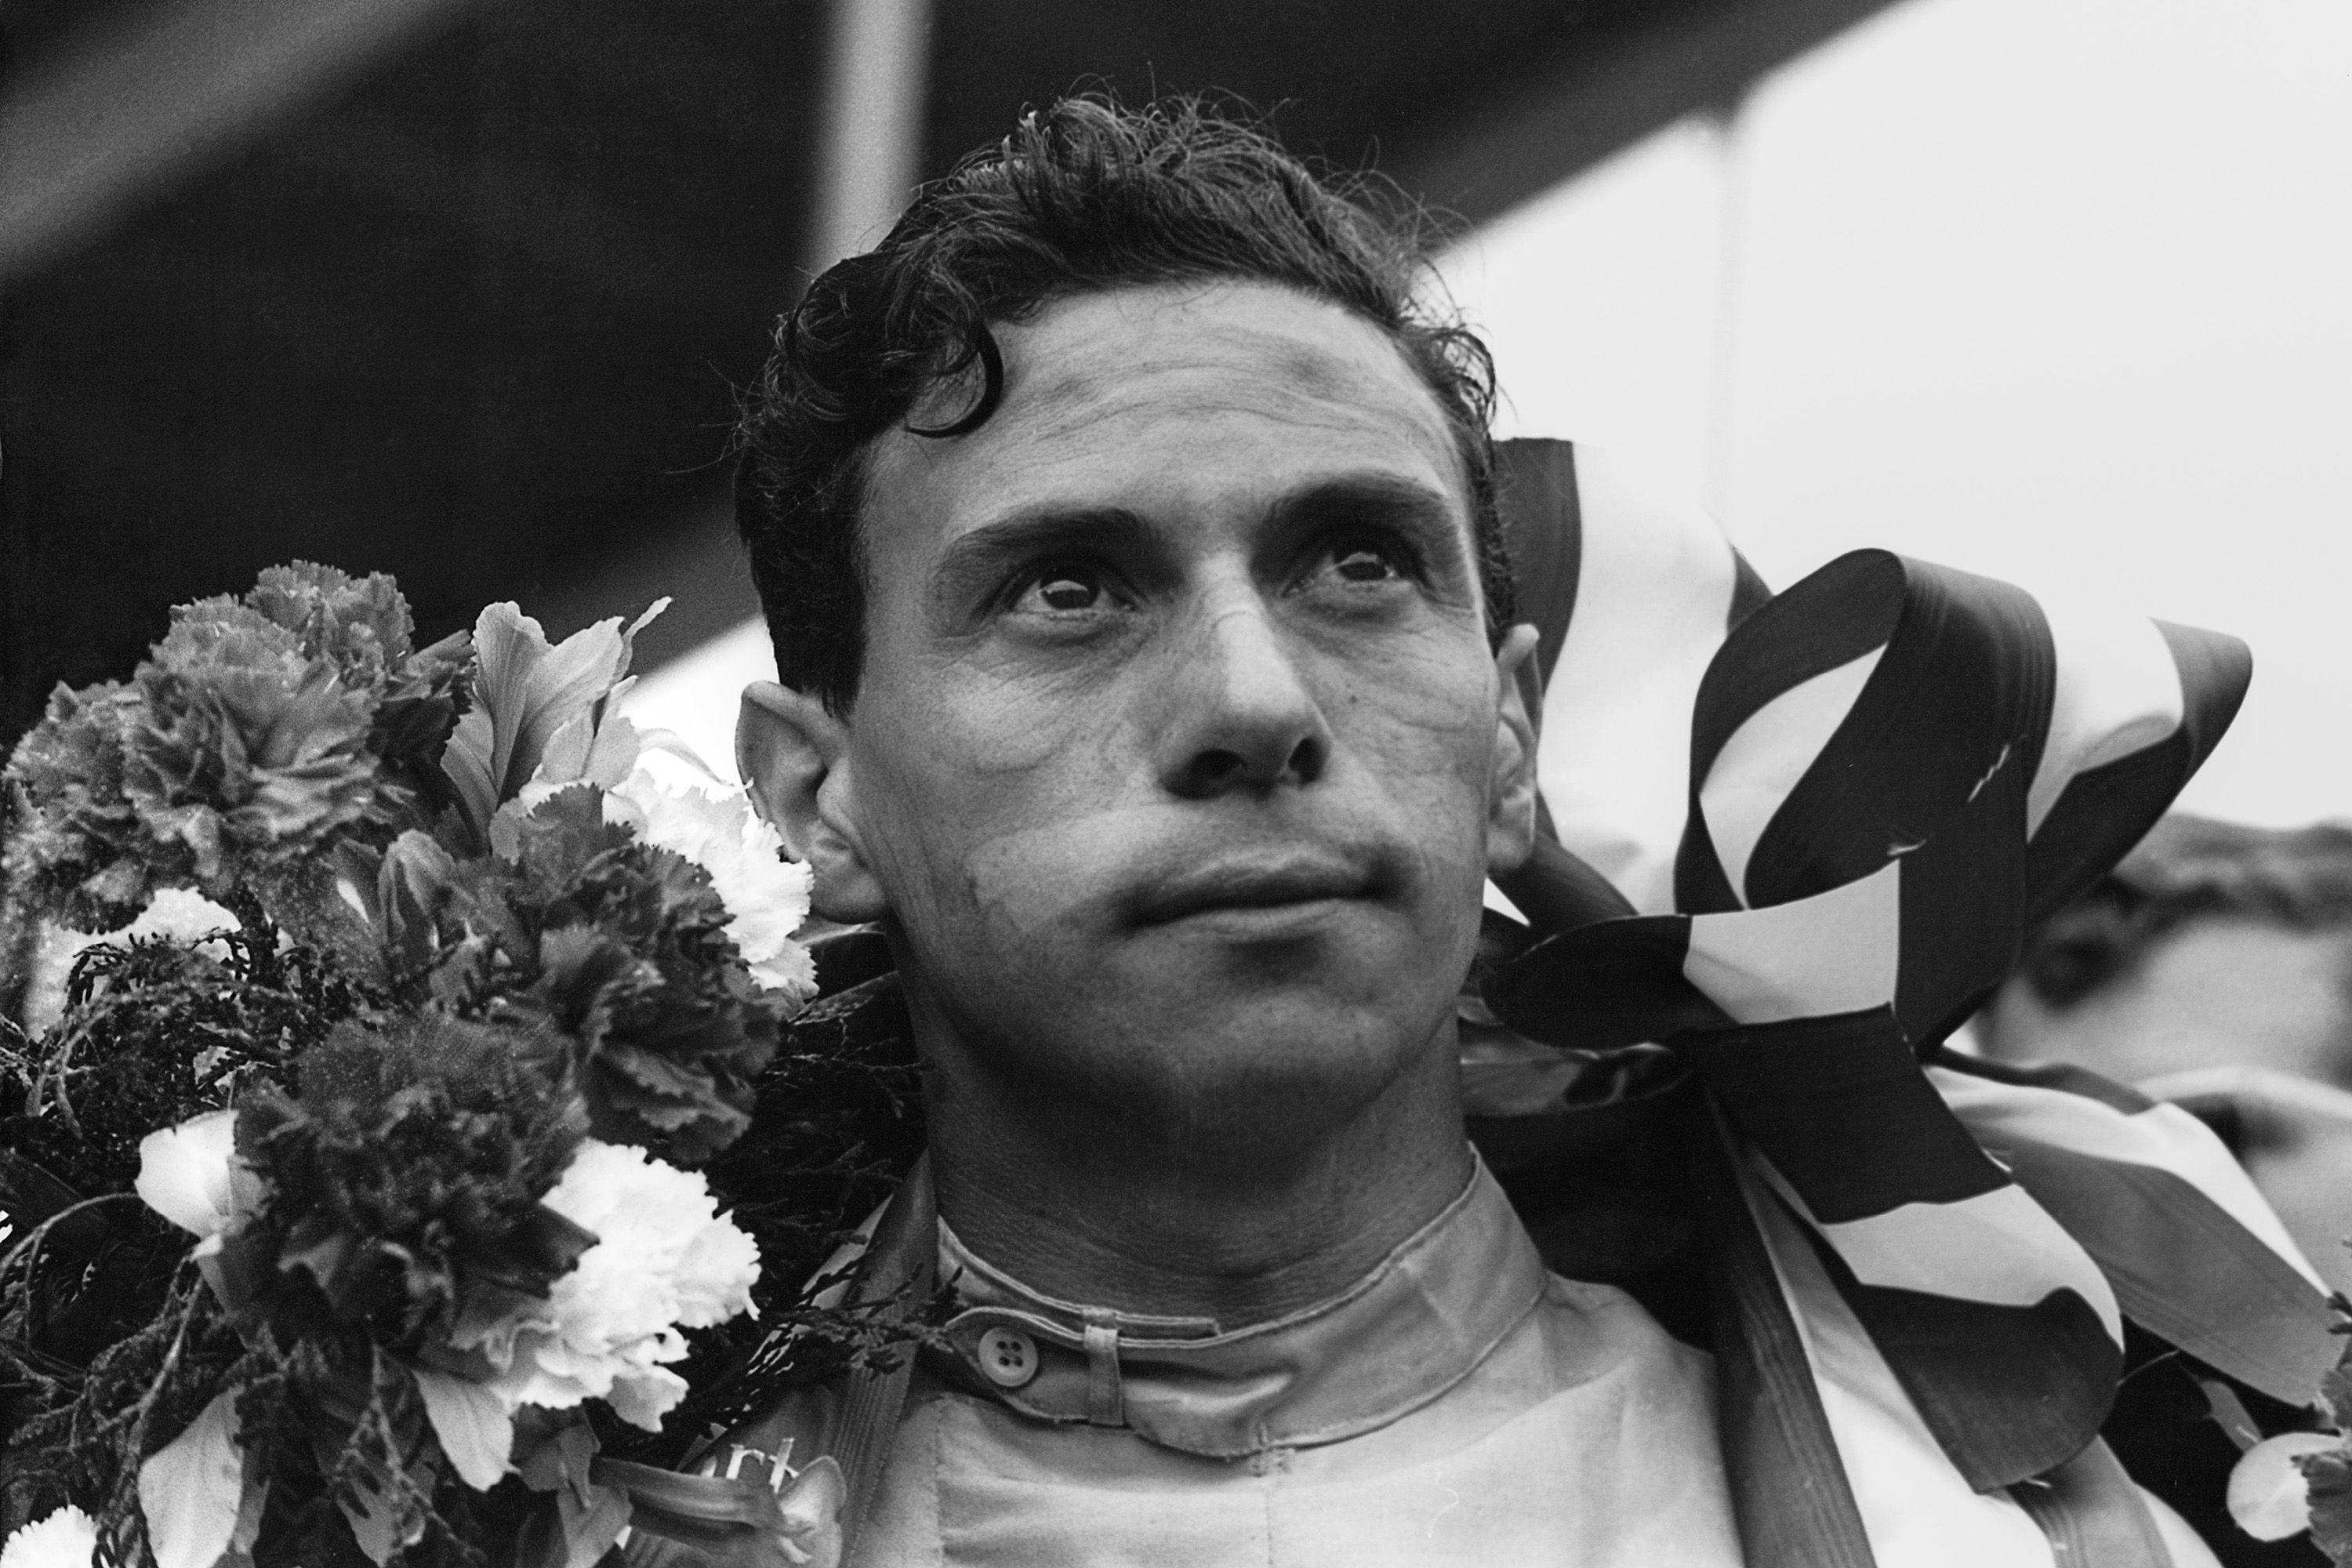 Watch Jim Clark Show Why He Was One of the Best